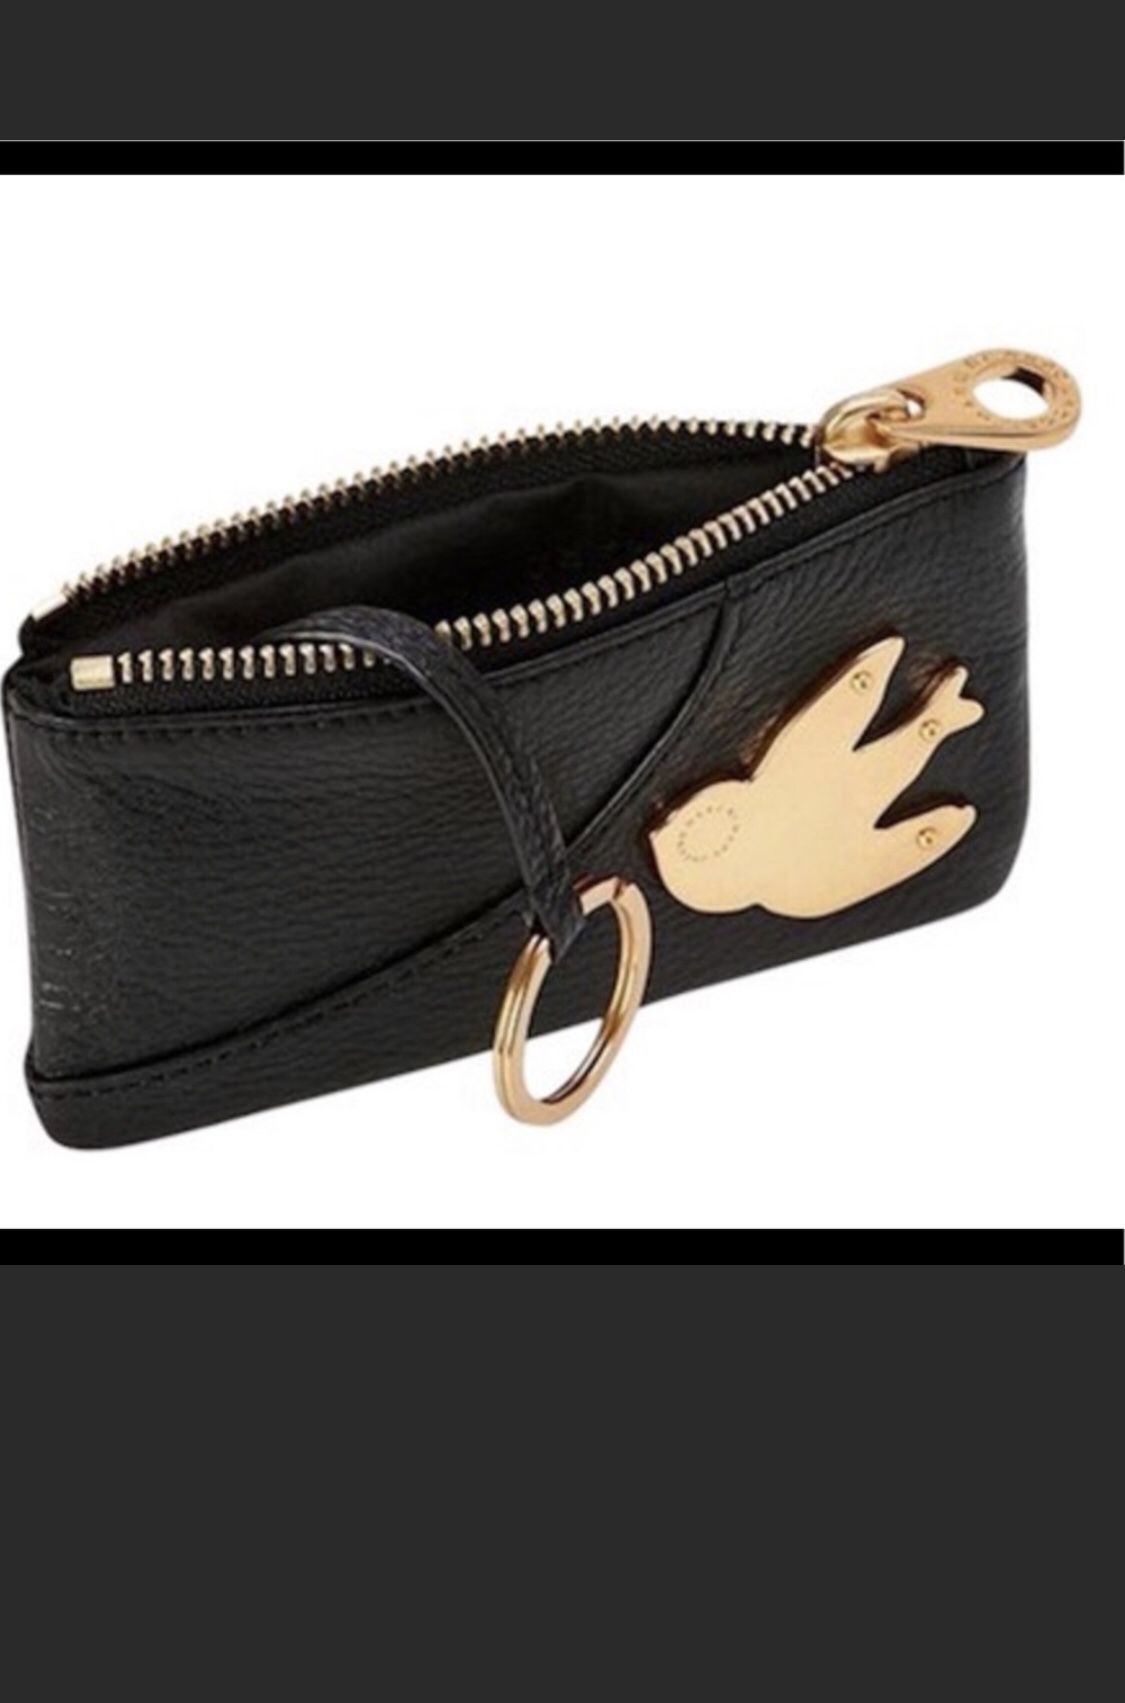 Marc by Marc Jacobs Petal to the Metal Key Wallet